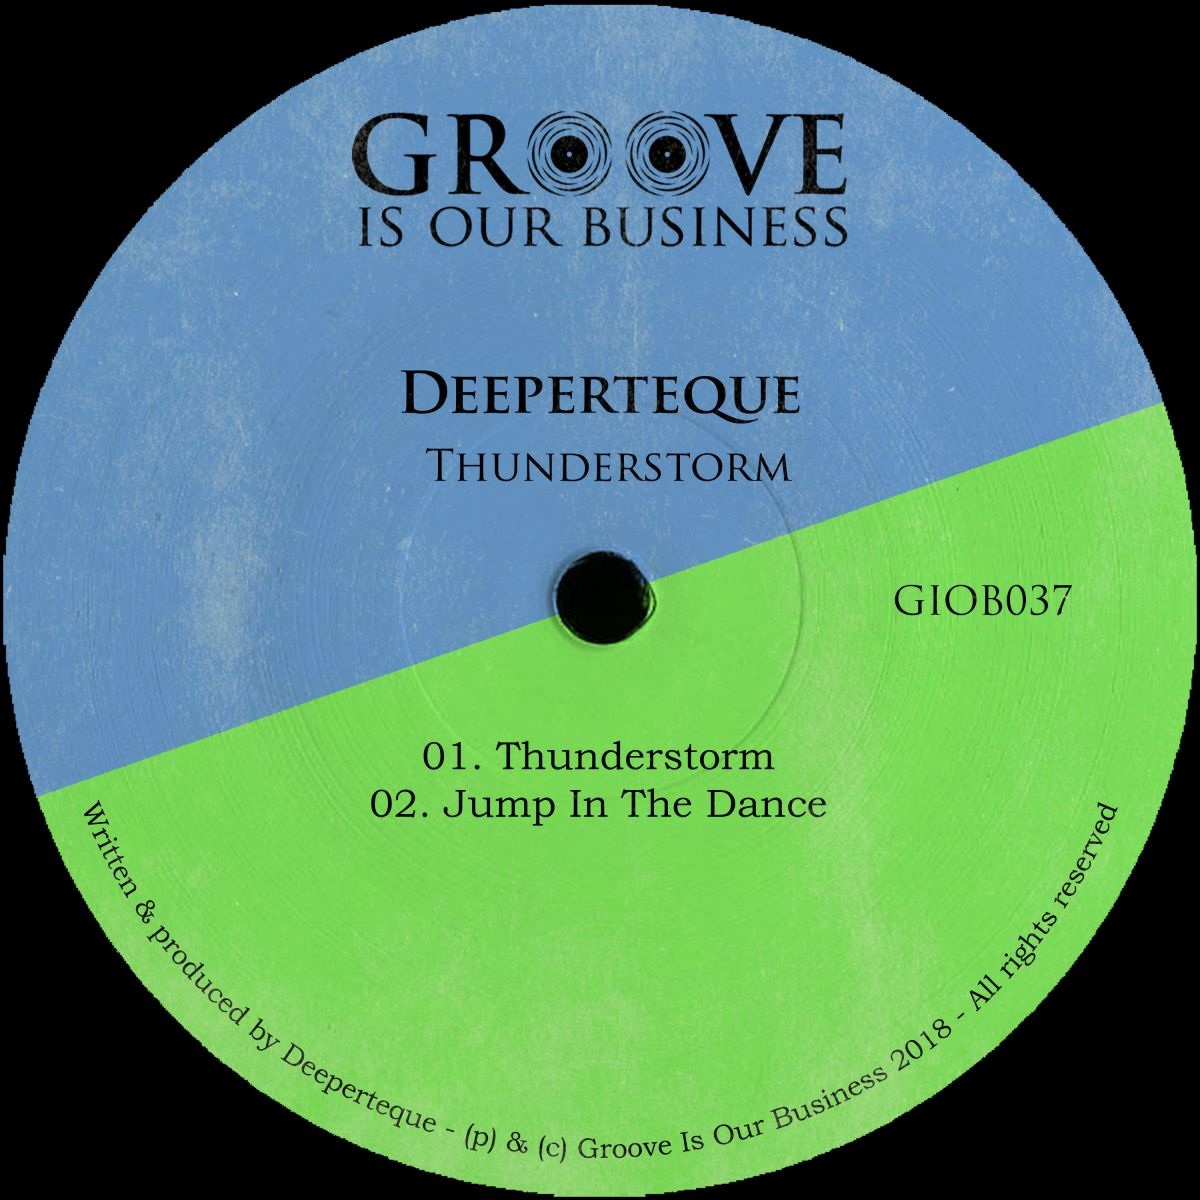 Deeperteque - Thunderstorm / Groove Is Our Business